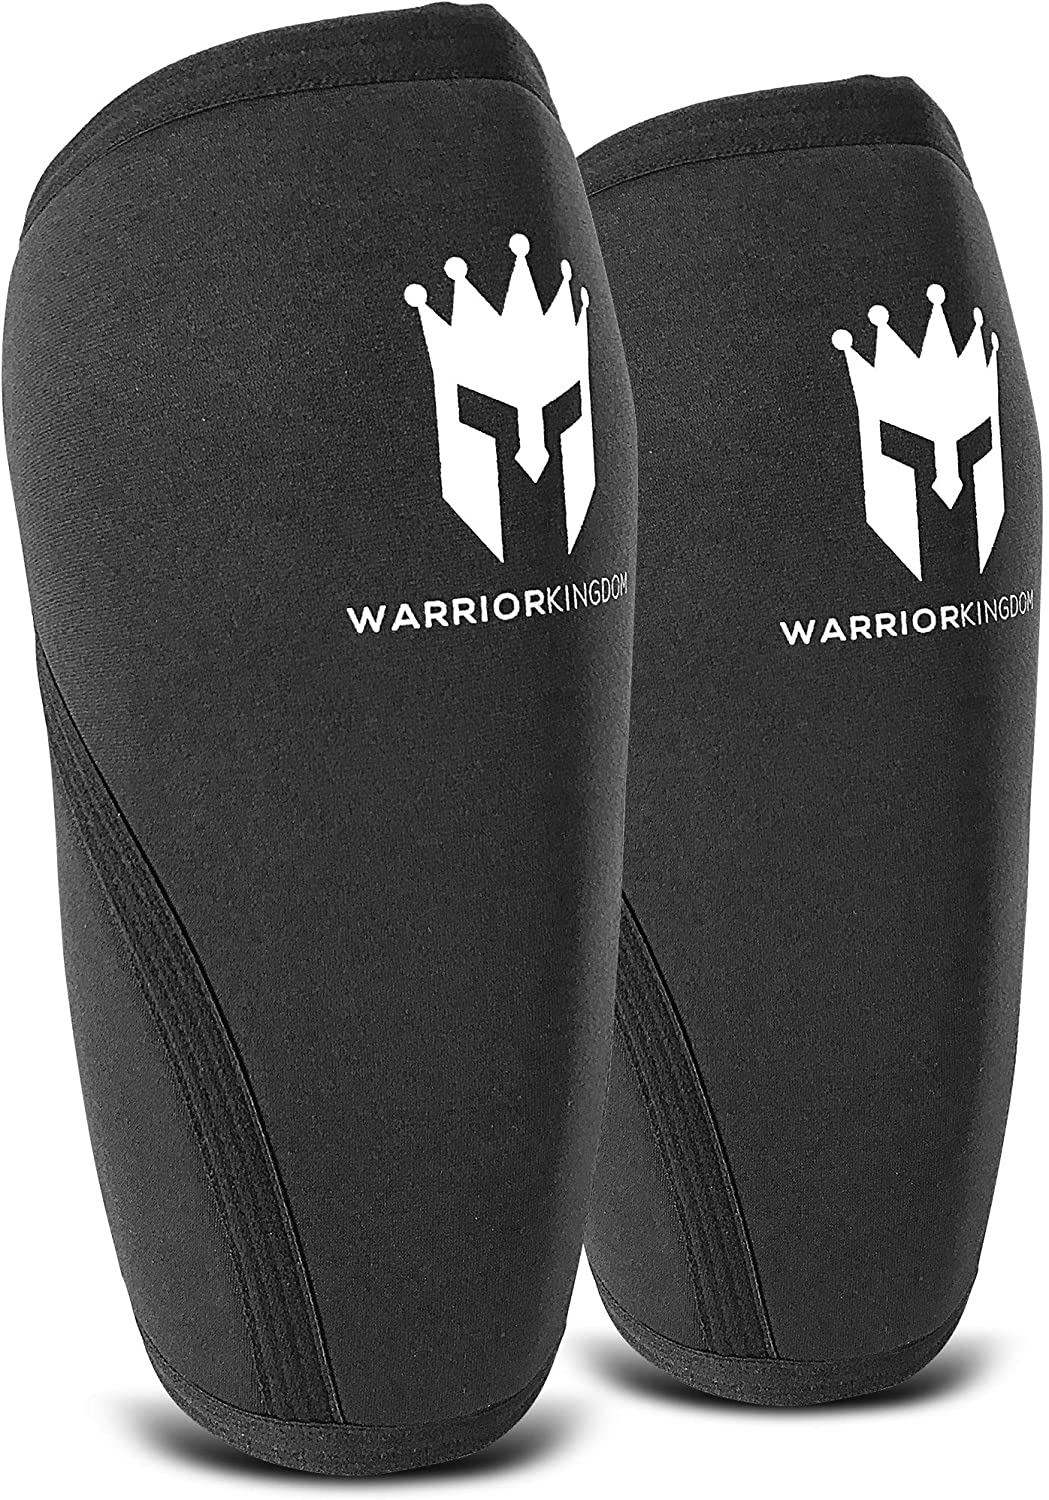 Warrior Kingdom Knee Sleeves for Squats